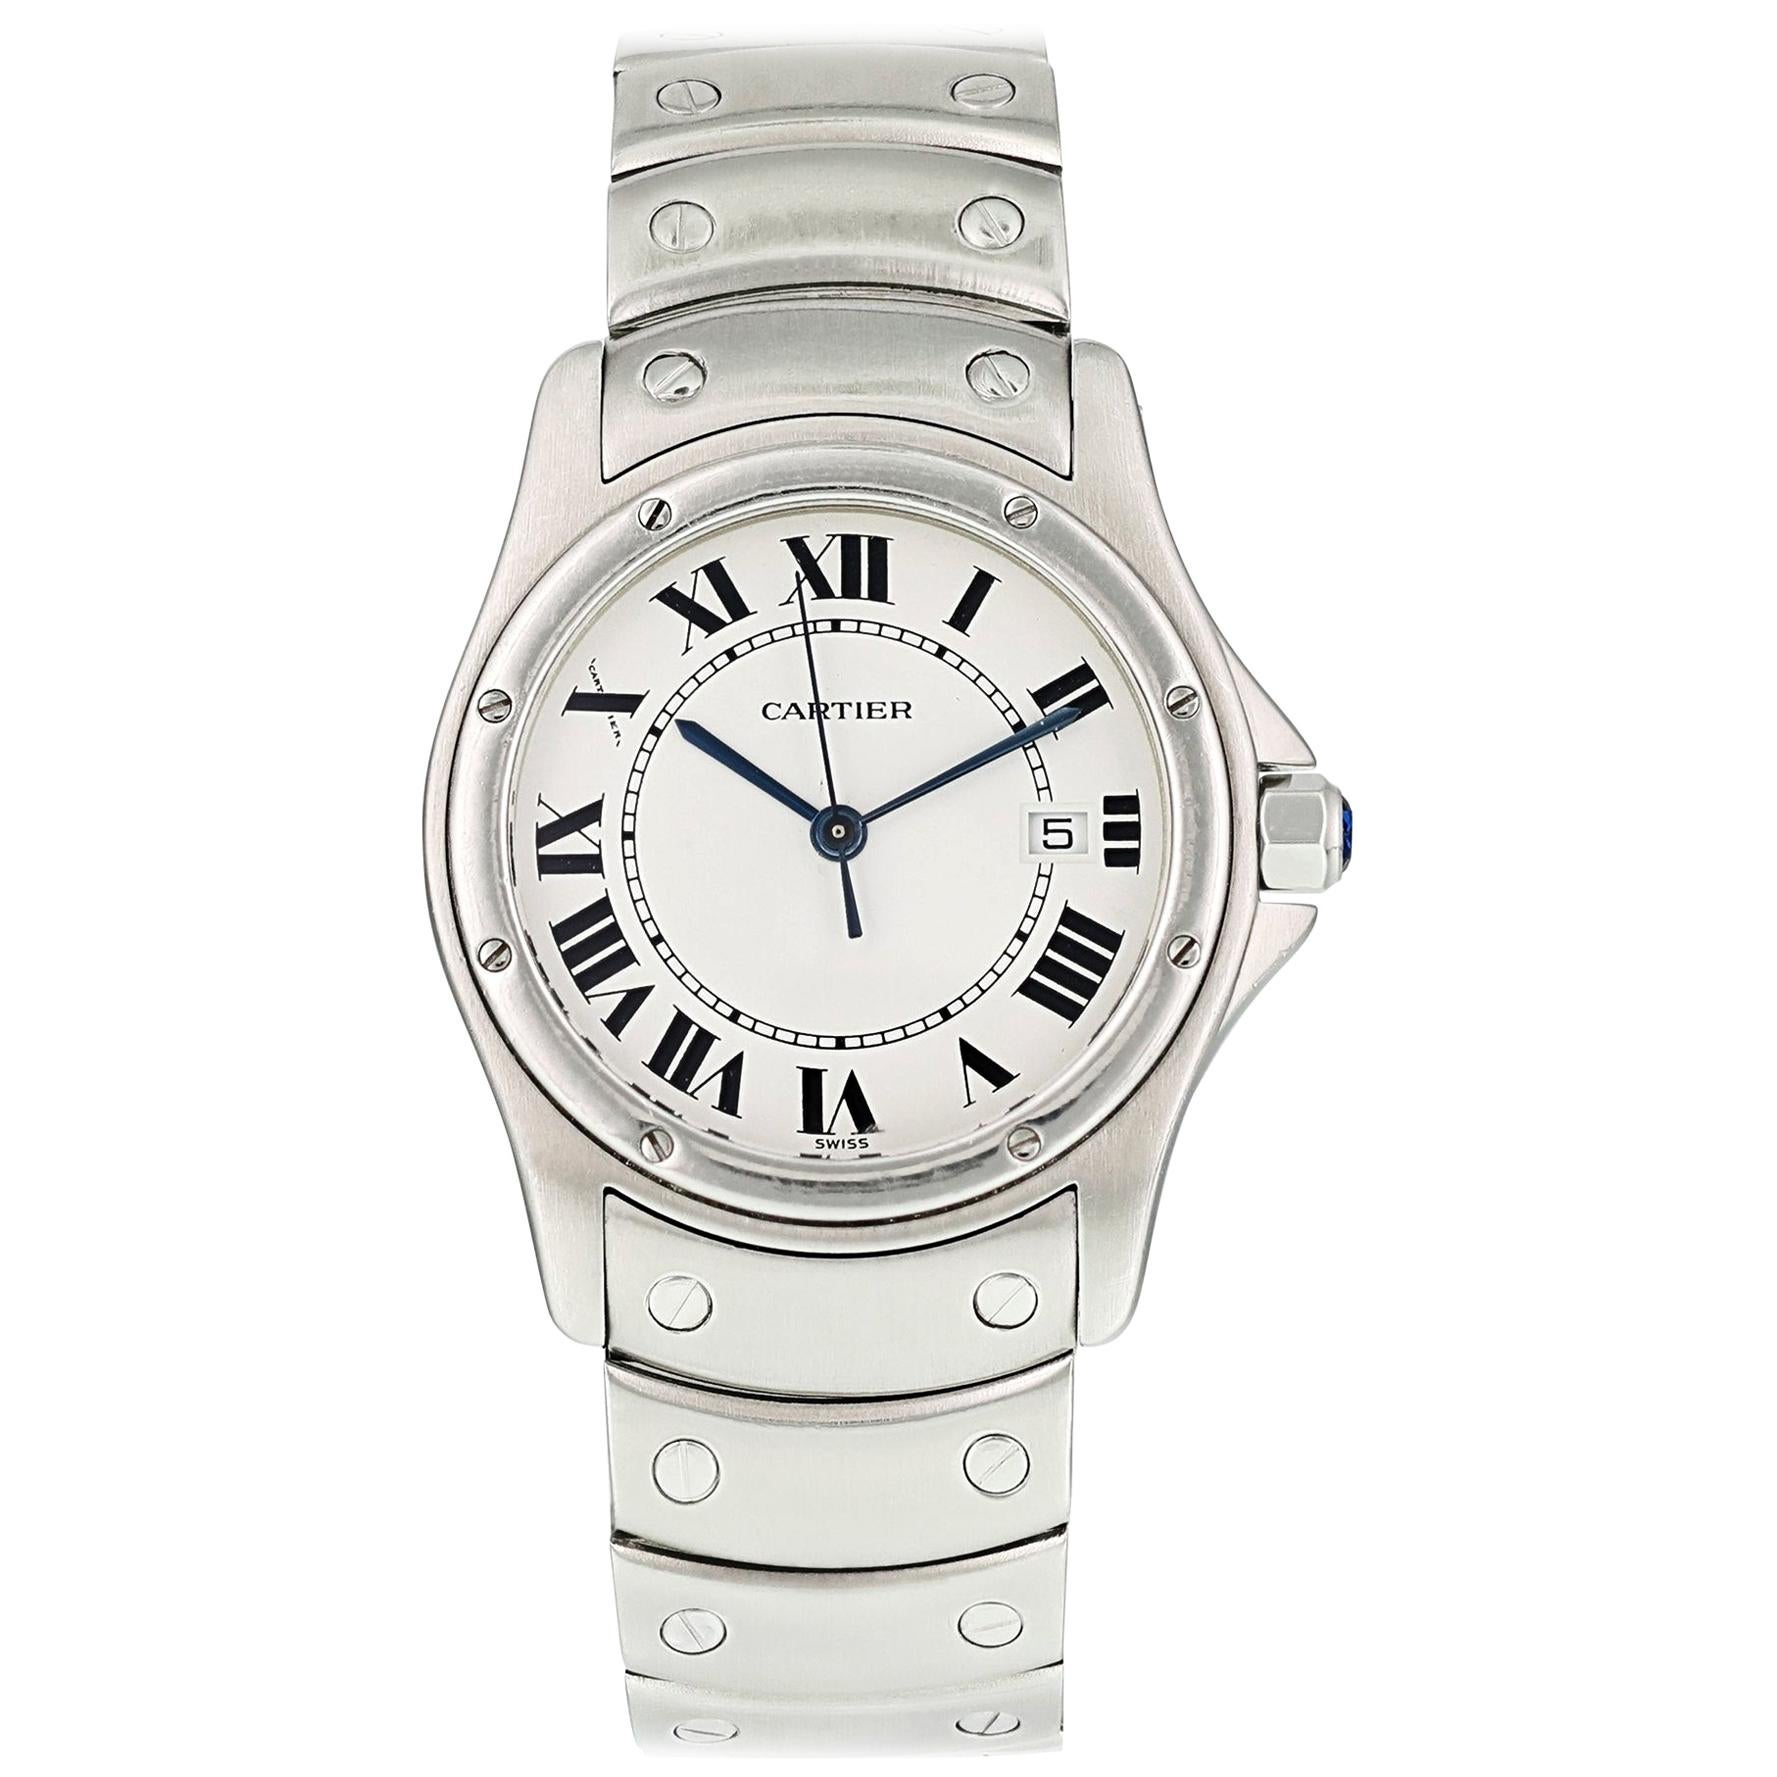 Cartier Santos Ronde 1561 Ladies Watch Box and Papers